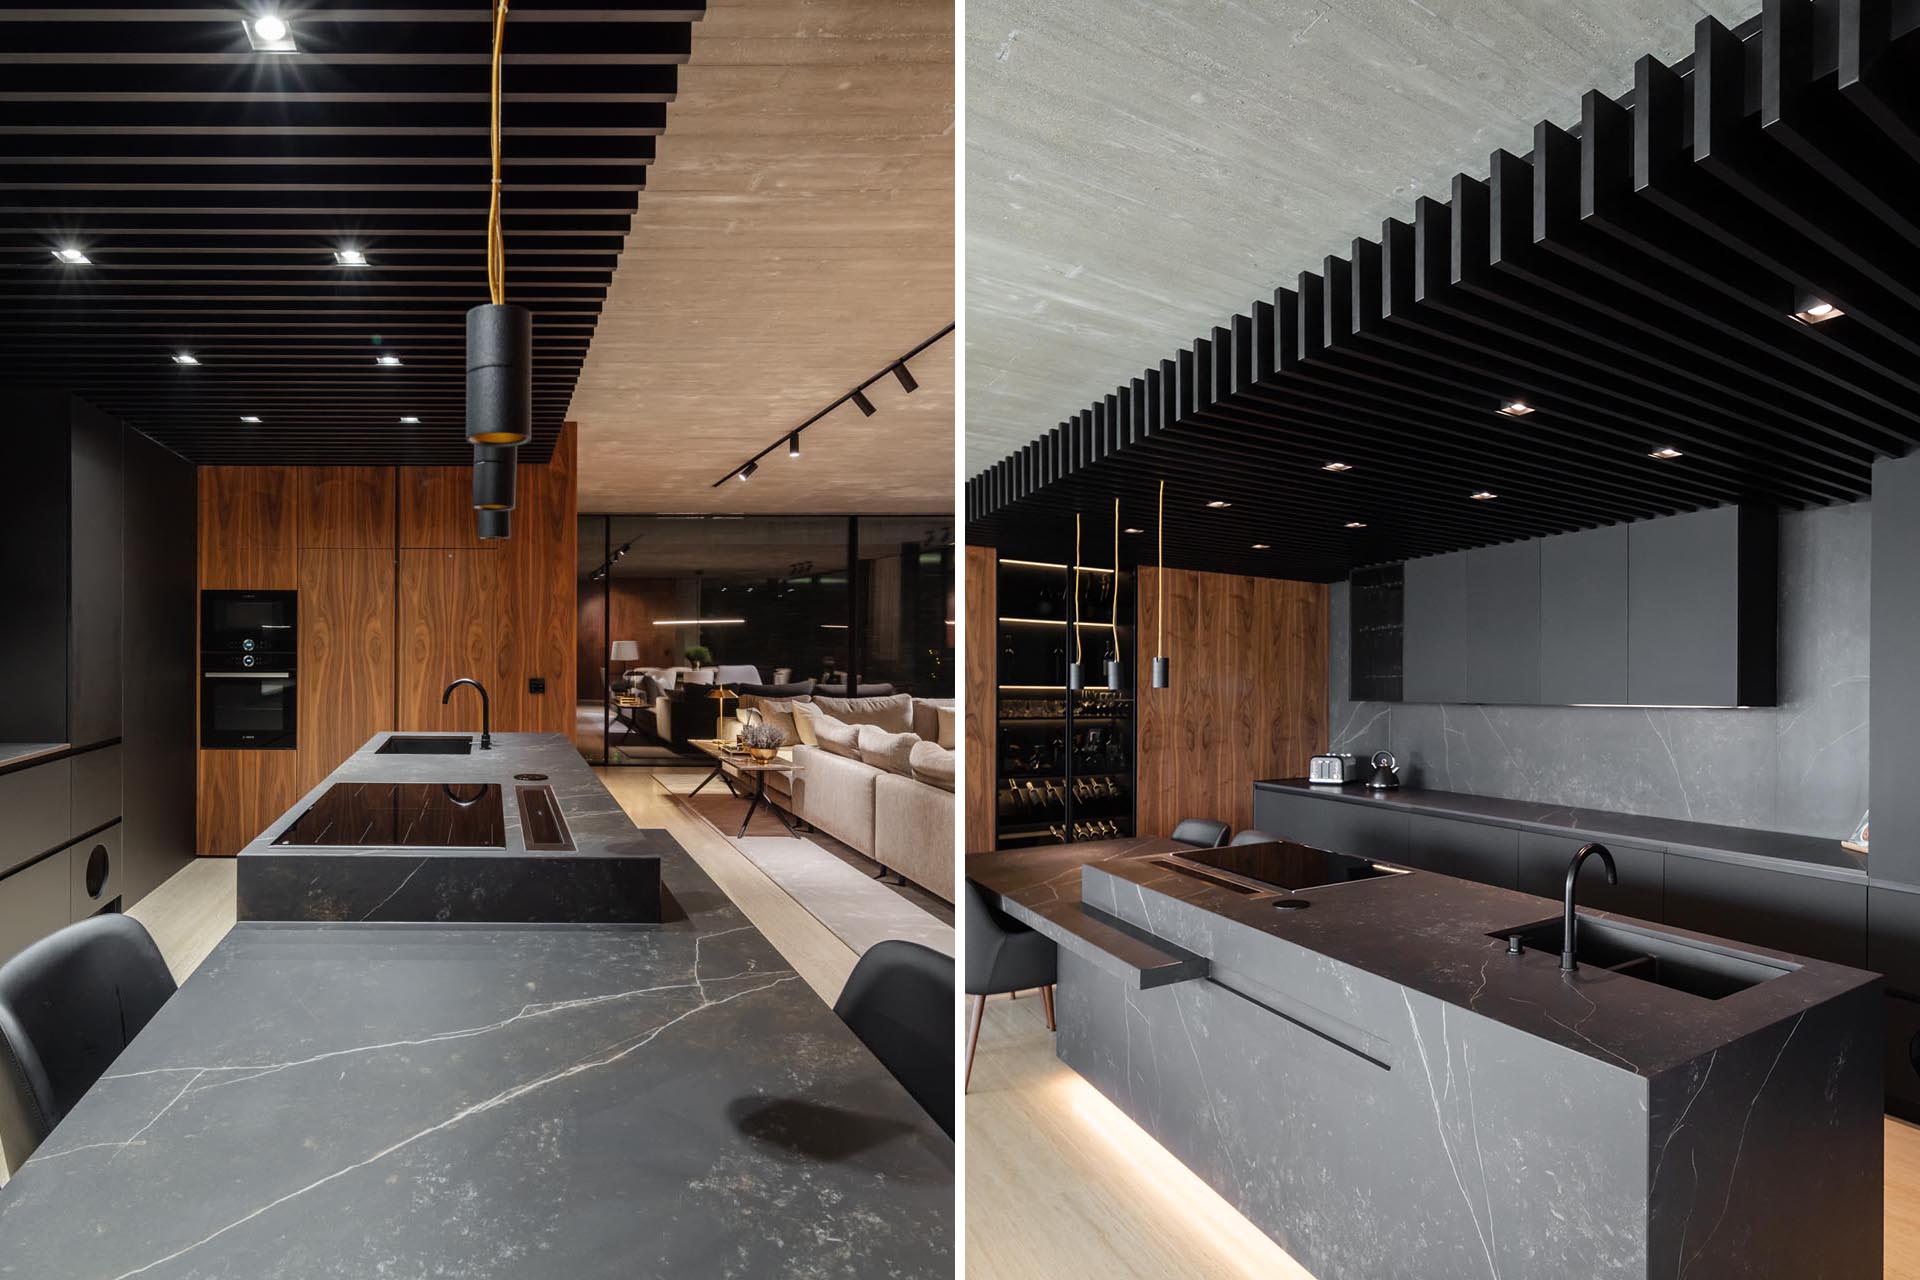 A modern kitchen with a wall of matte black minimalist cabinets, a black wood ceiling, and large island with seating.